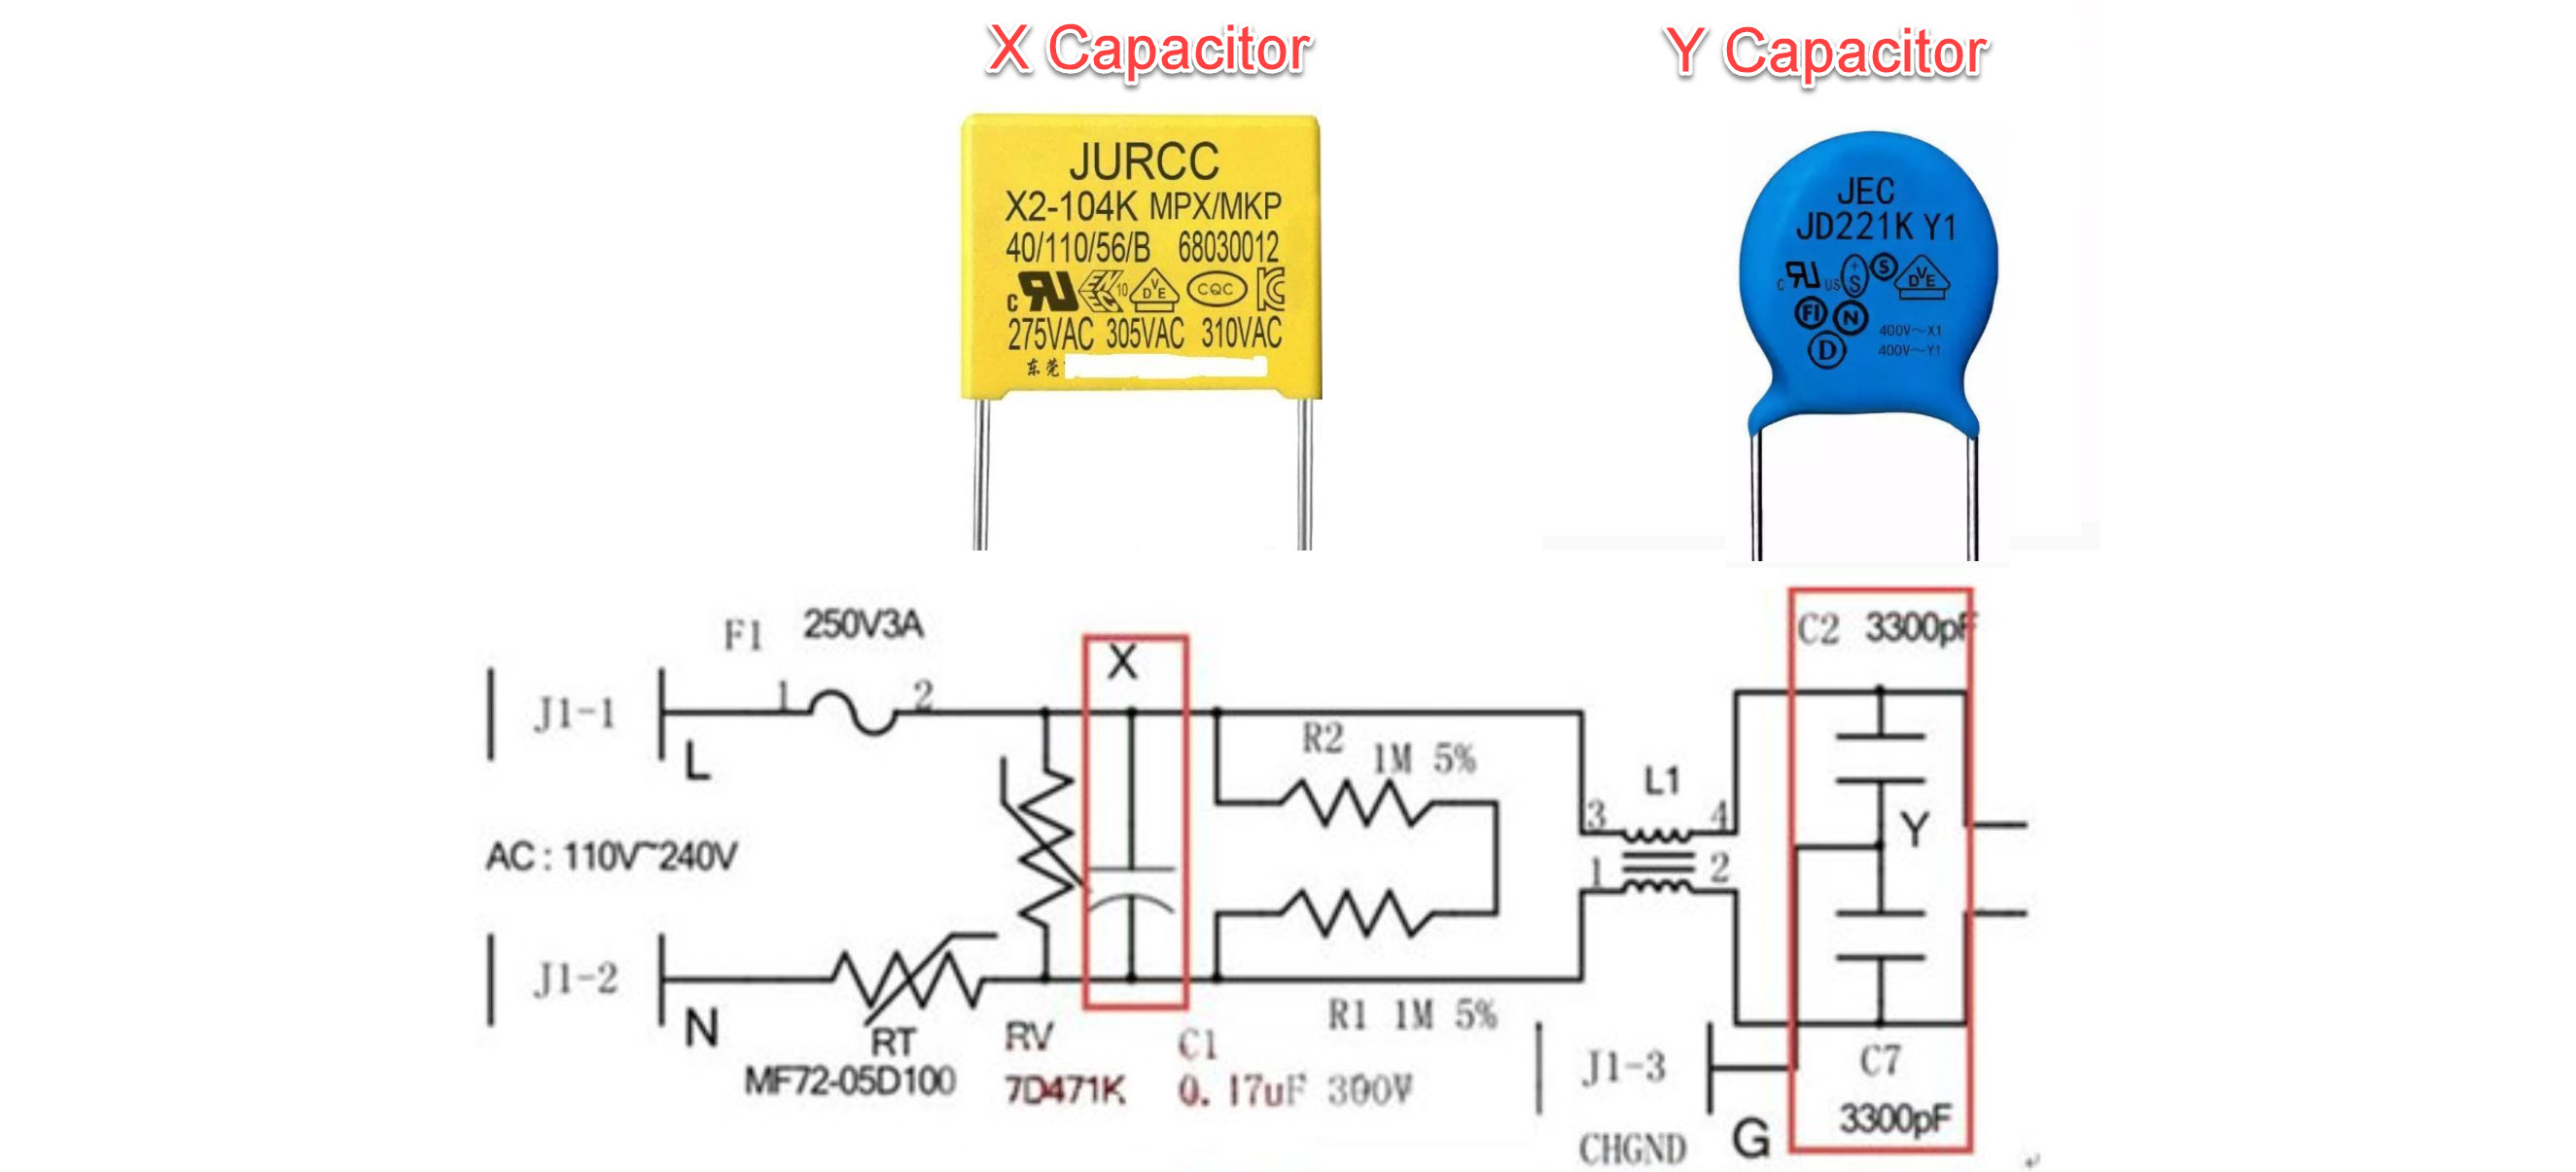 How to identify X capacitor and Y capacitor?  What's the role of X capacitor and Y capacitor? 